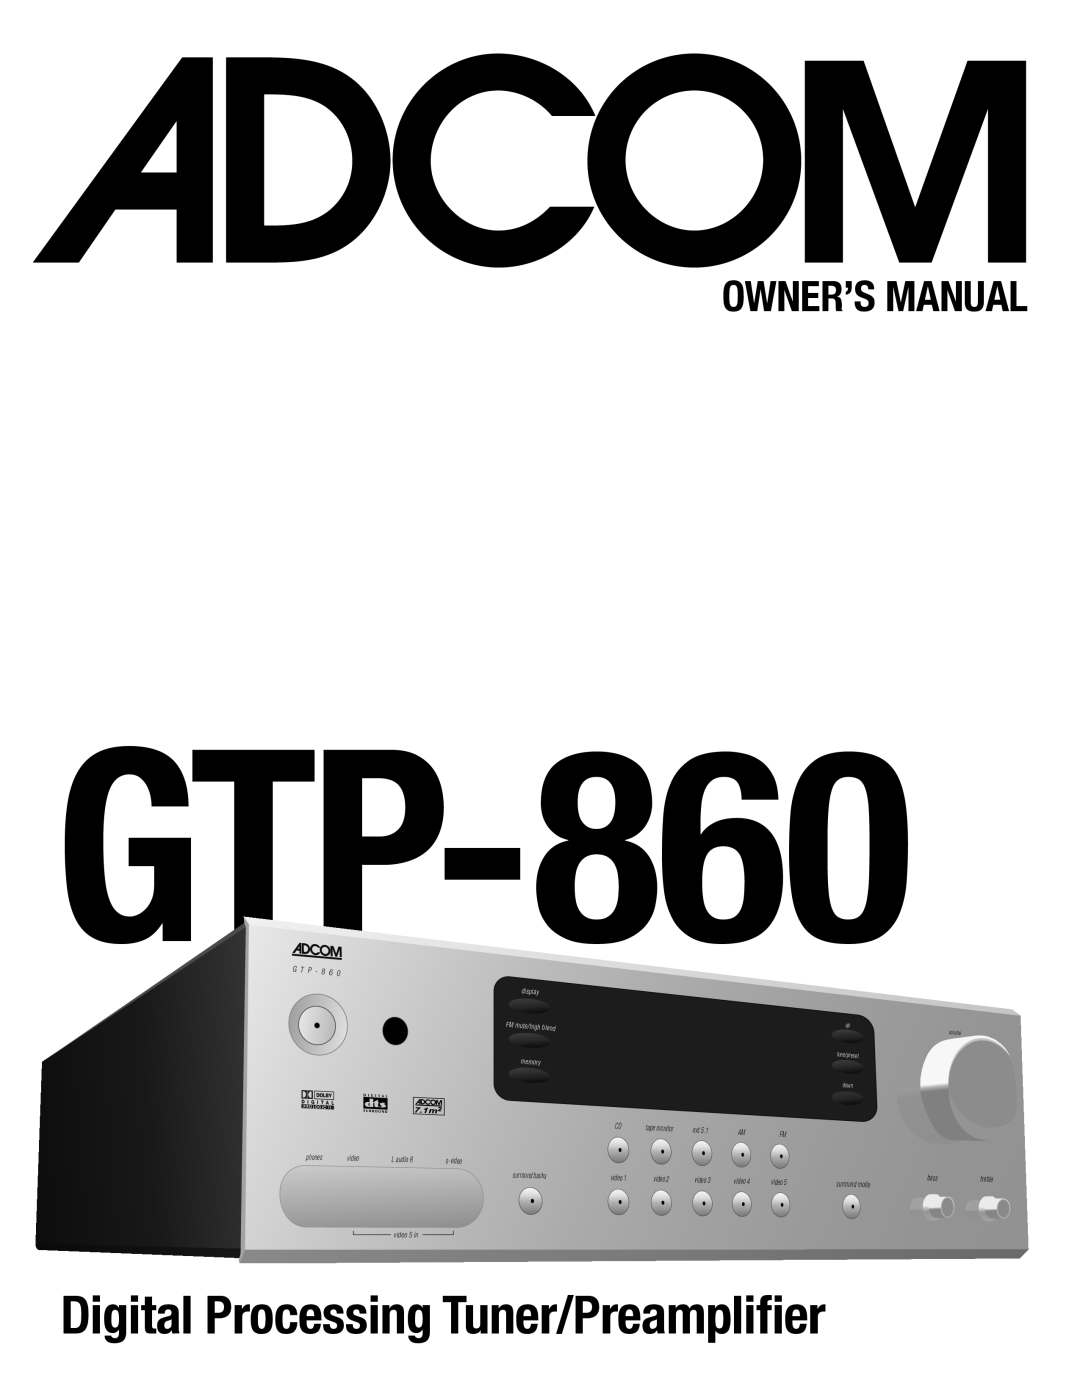 Adcom GTP-860 owner manual Digital Processing Tuner/Preamplifier, Owner’S Manual, mute/high blend, tape monitor, video 